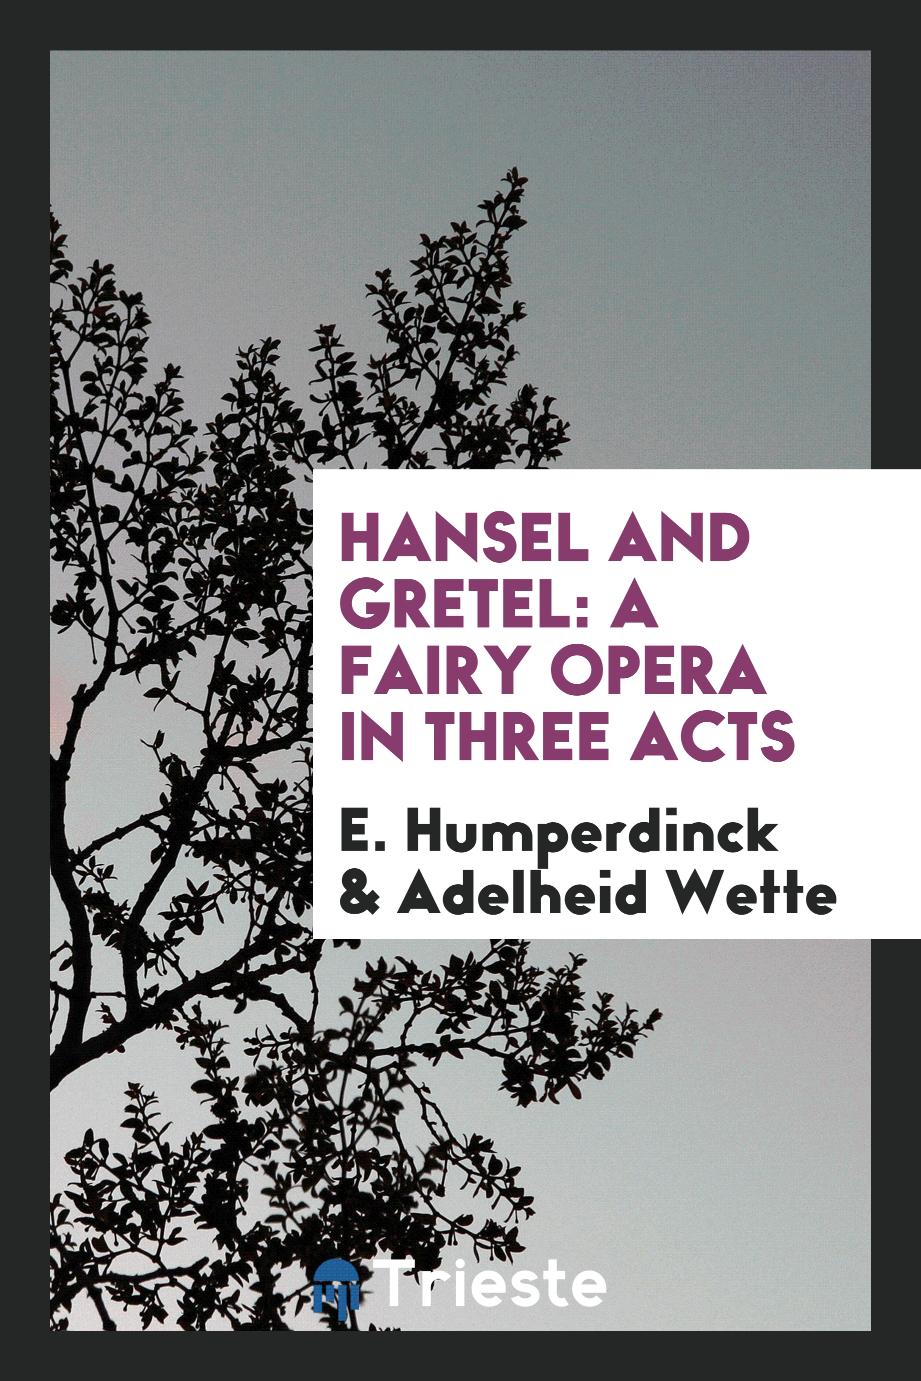 Hansel and Gretel: a fairy opera in three acts